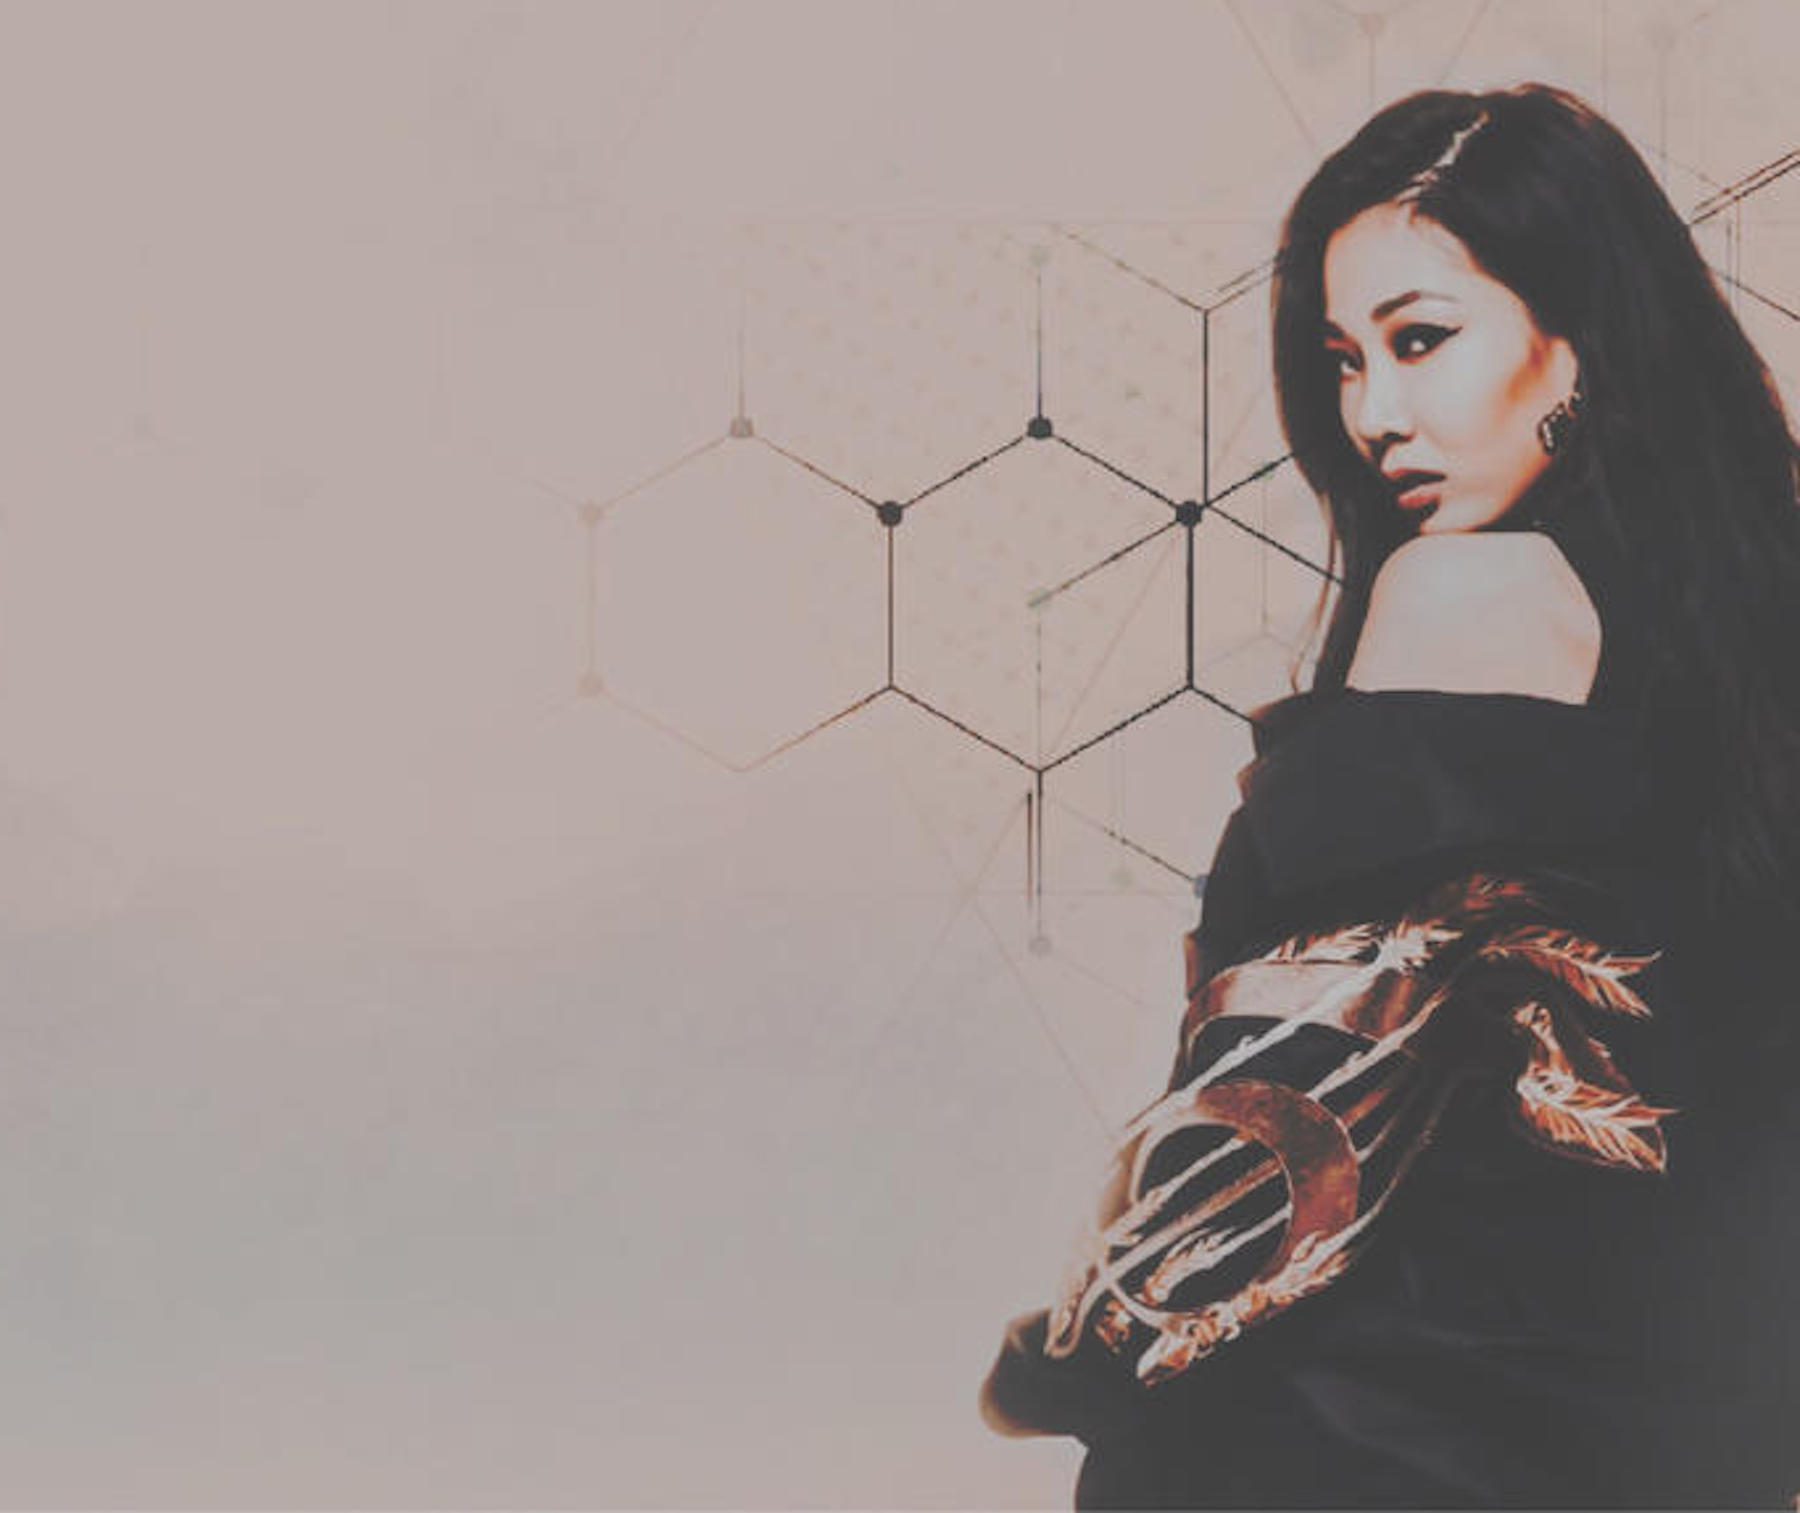 K-pop soloist Jessi with dark hair against beige background and geometric shapes.